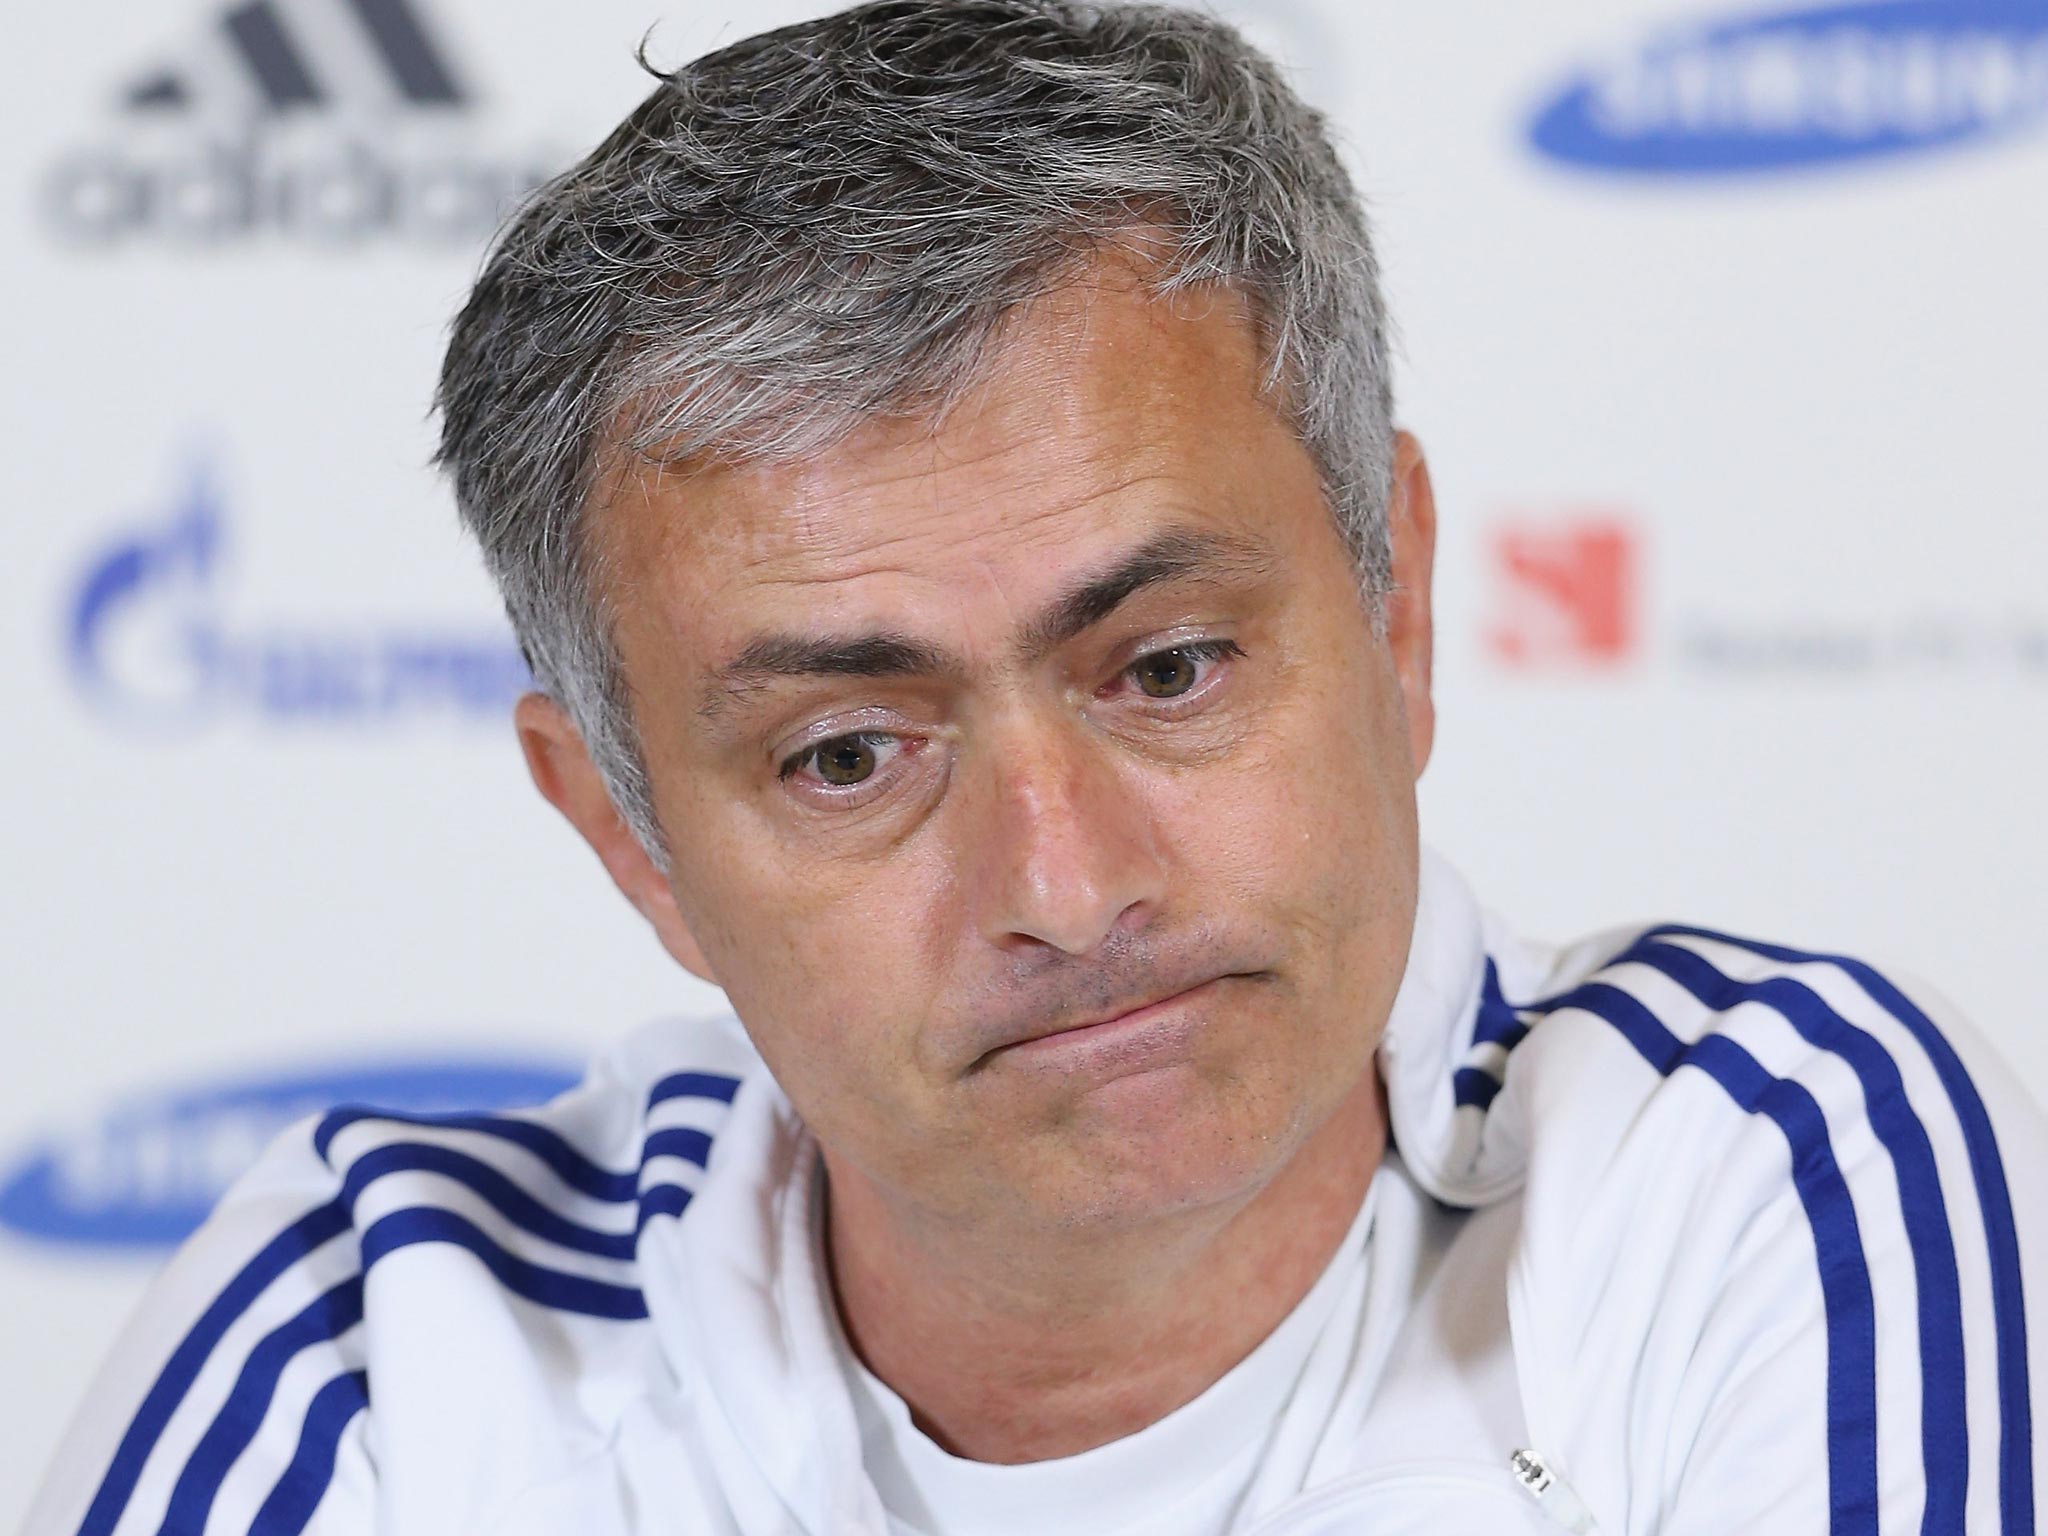 ‘Now is the moment to say the Champions League is not over, far
from it,’ claimed Jose Mourinho